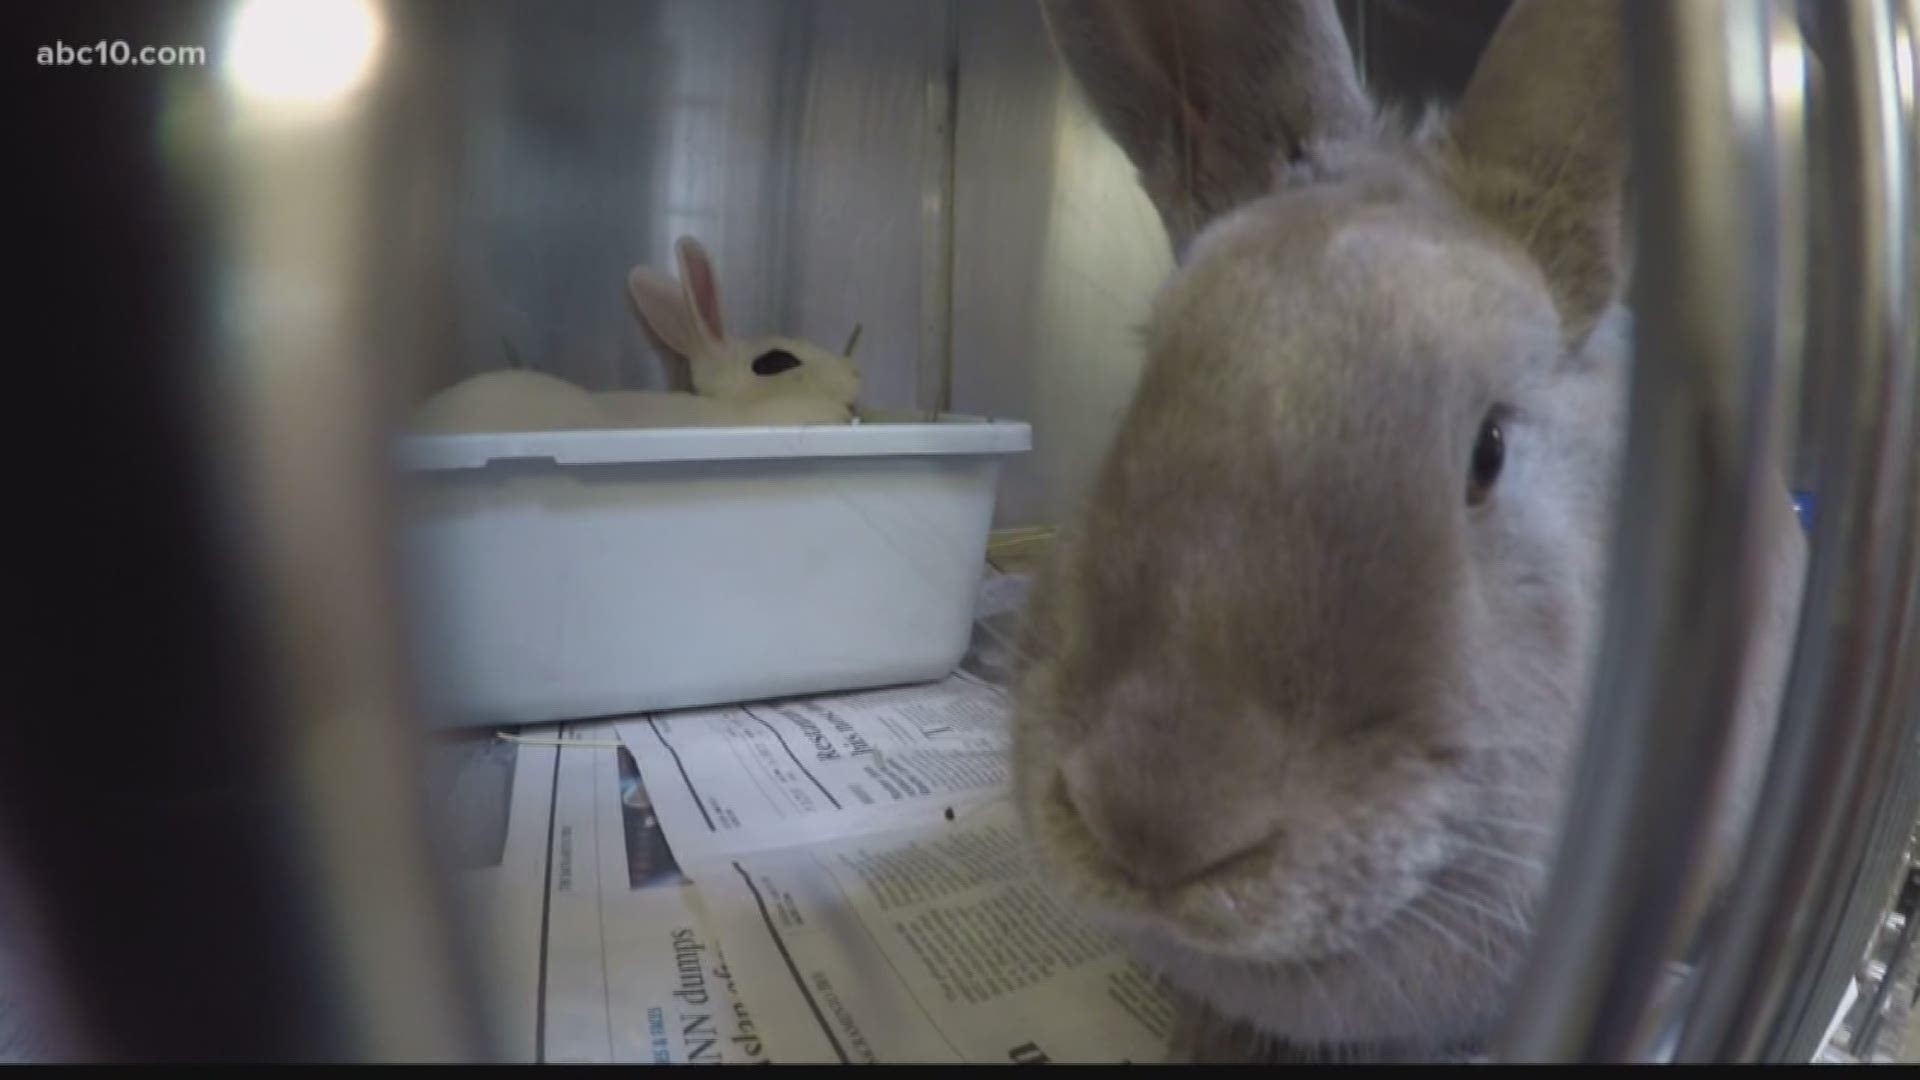 Nearly 300 rabbits seized from Folsom home (March 17, 2018)